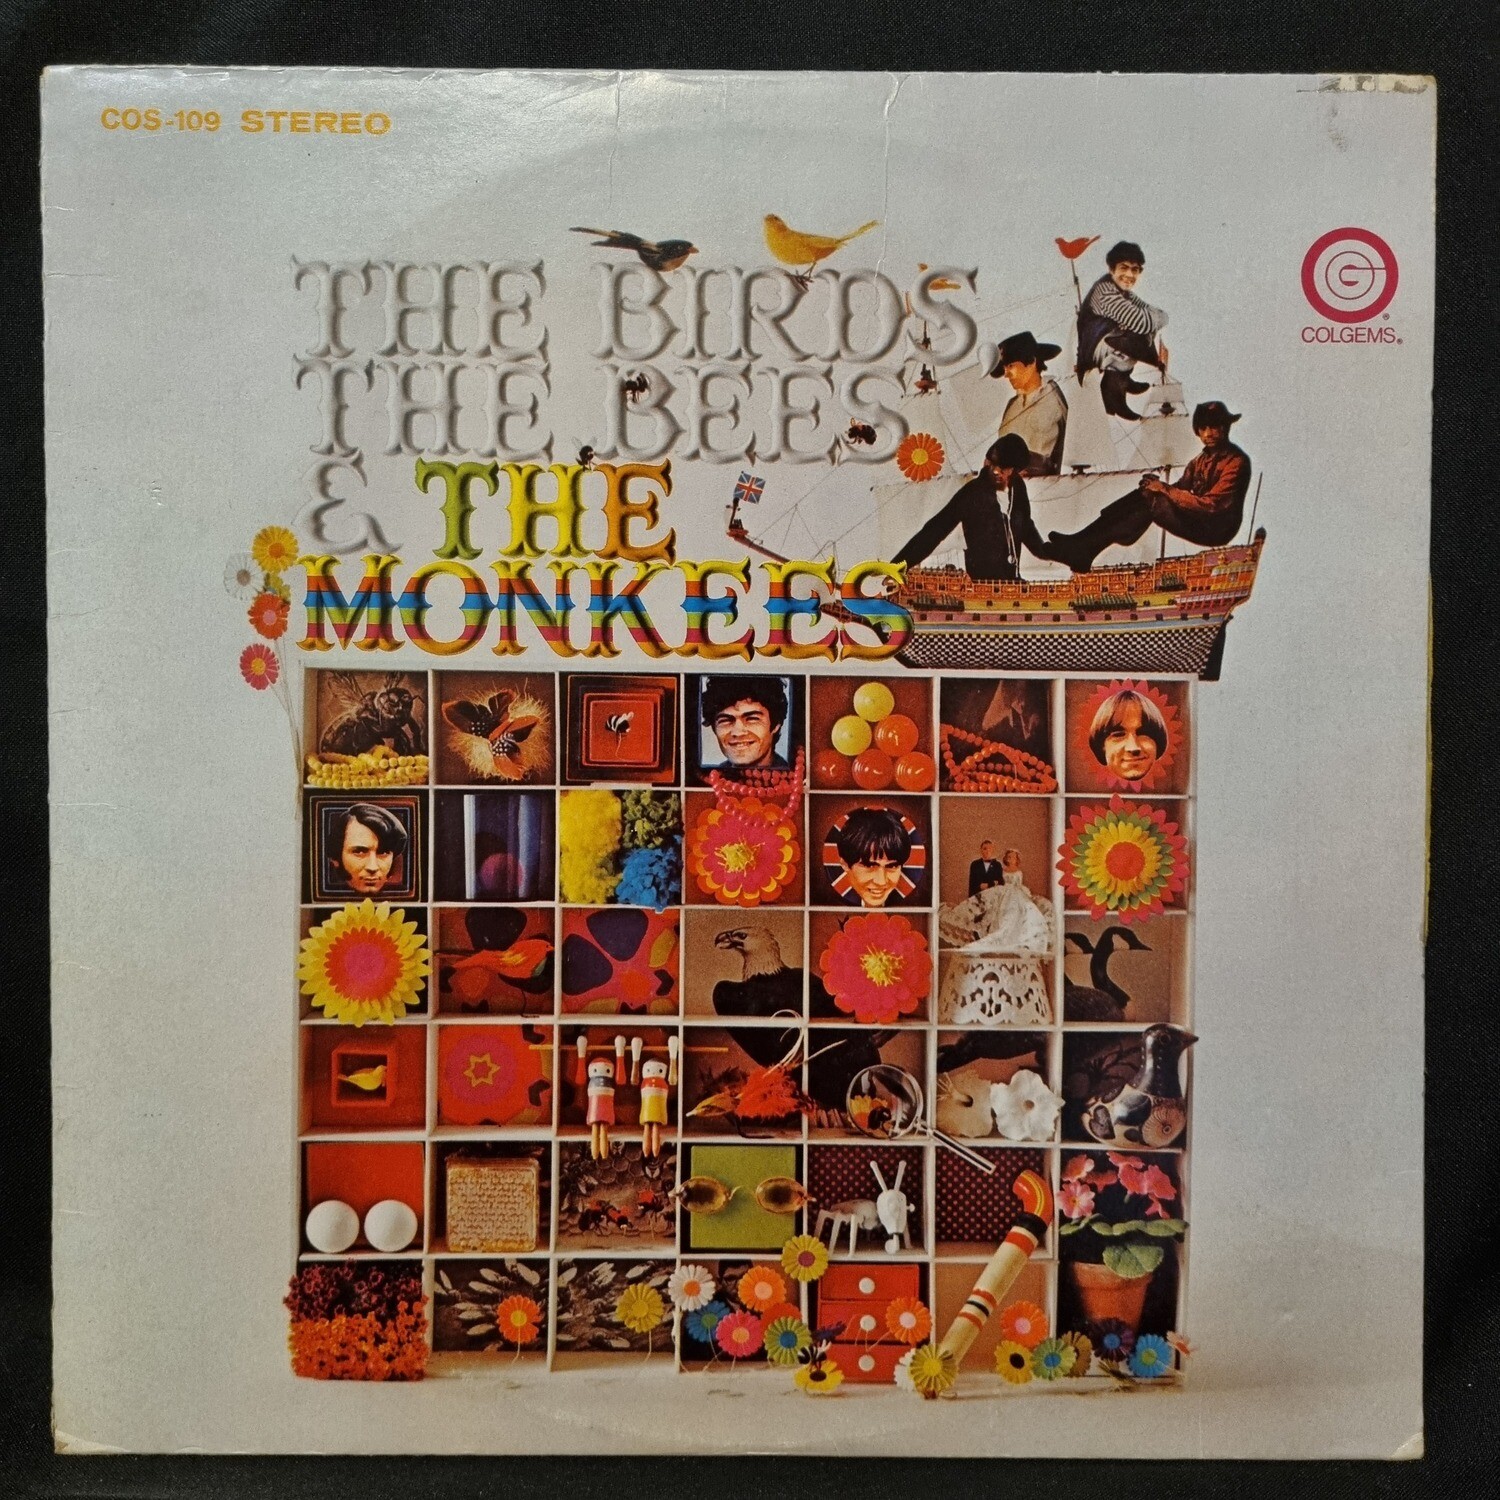 The Monkees- The Birds, The Bees and The Monkees